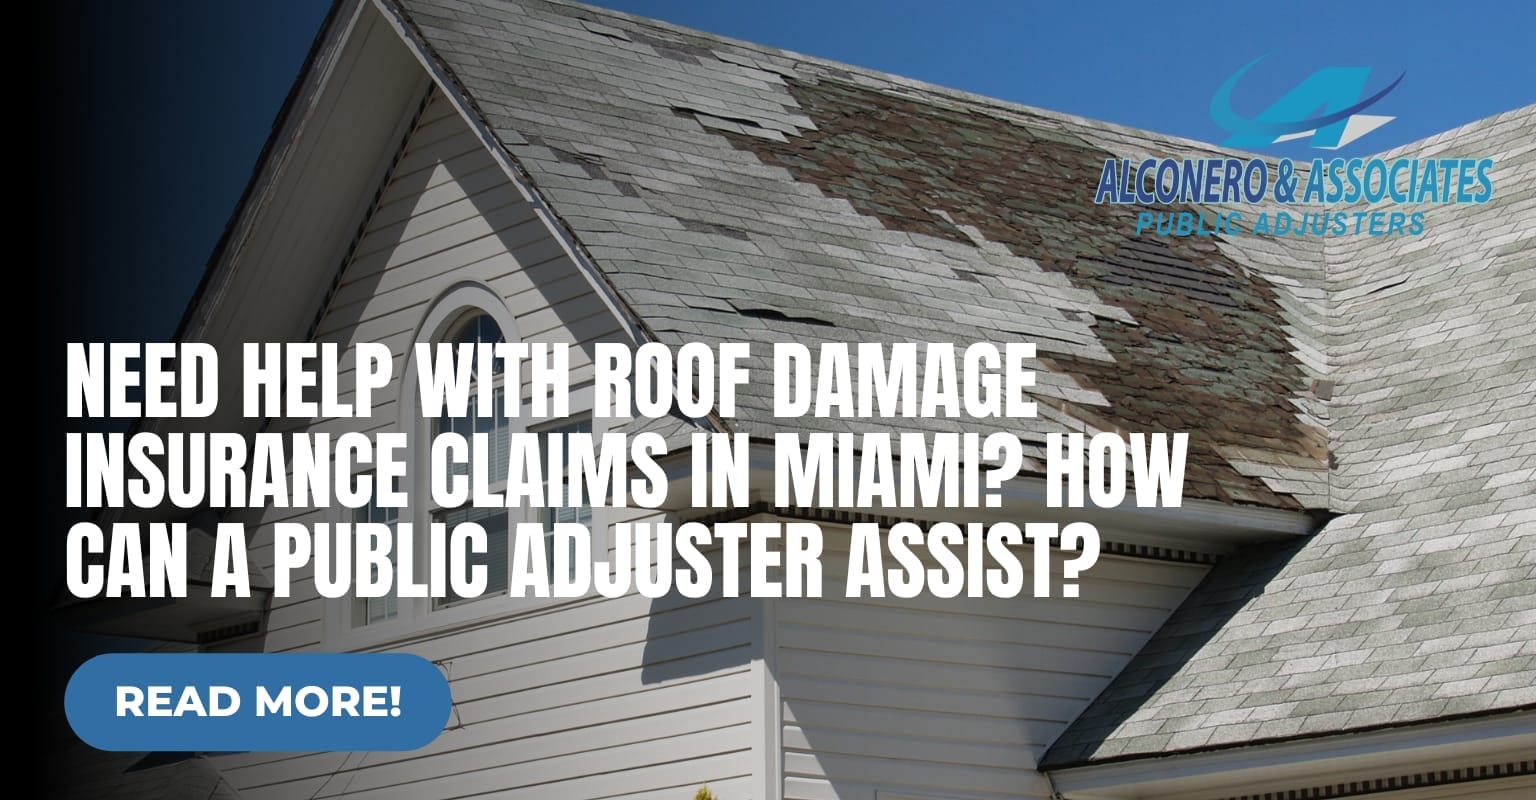 Need Help with Roof Damage Insurance Claims in Miami? How Can a Public Adjuster Assist?